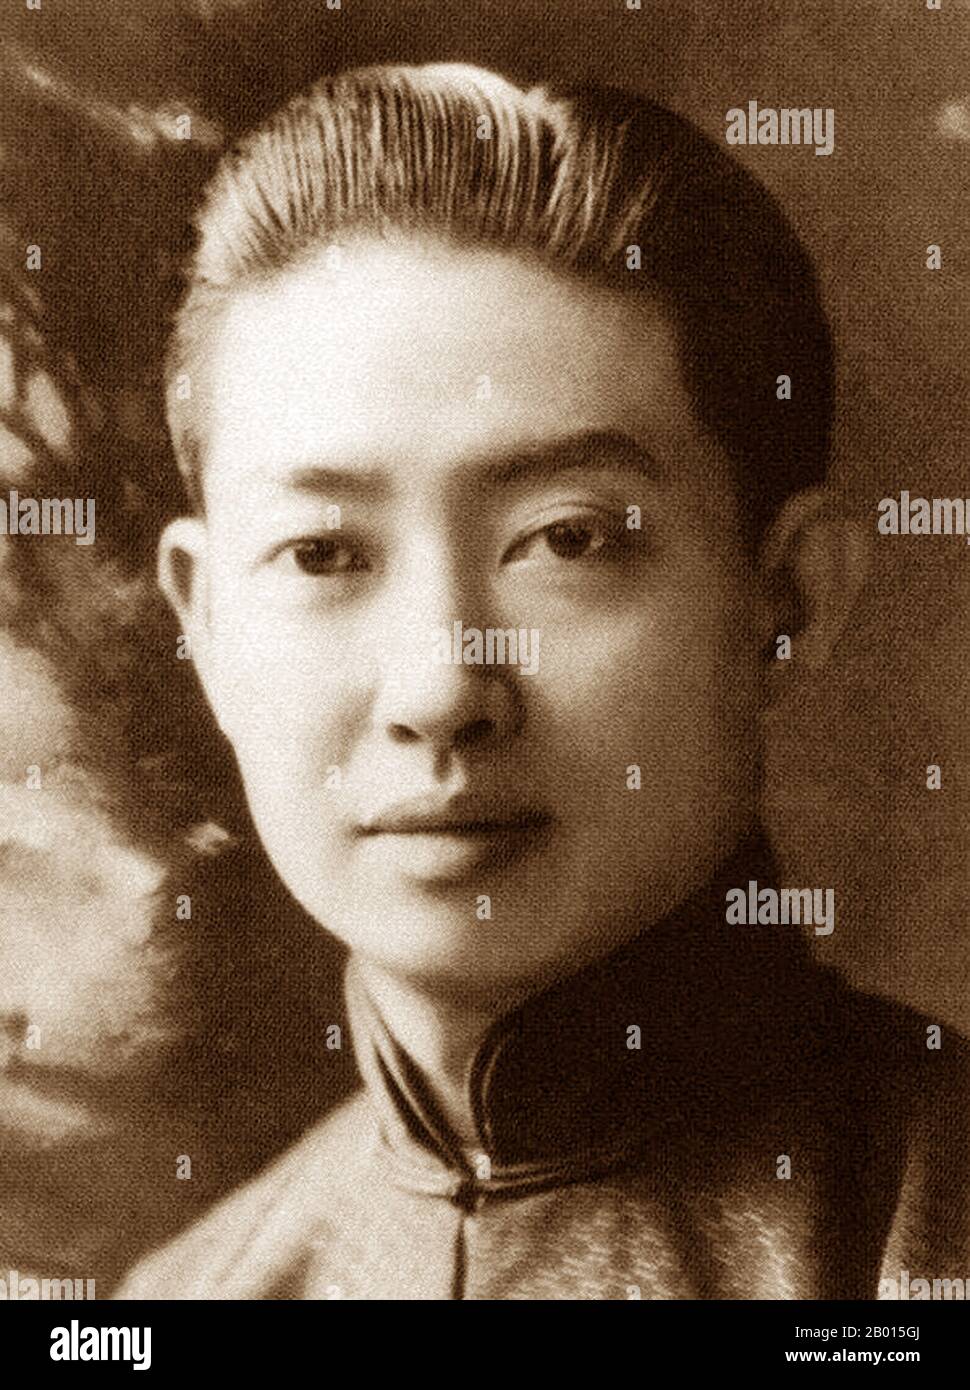 China: Mei Lanfang, famous Beijing (Peking) Opera artist (1894-1961).  Mei Lan was born in Taizhou, Jiangsu, into a family of Beijing Opera and Kunqu performers. He made his stage debut at the Guanghe Theatre in 1904 when he was 10 years old.  In his 50-year stage career, he maintained strong continuity while always working on new techniques. His most famous roles were those of female characters; skillful portrayal of women won him international acclaim. He also played an important part in continuing the performance tradition of Kunqu. Stock Photo